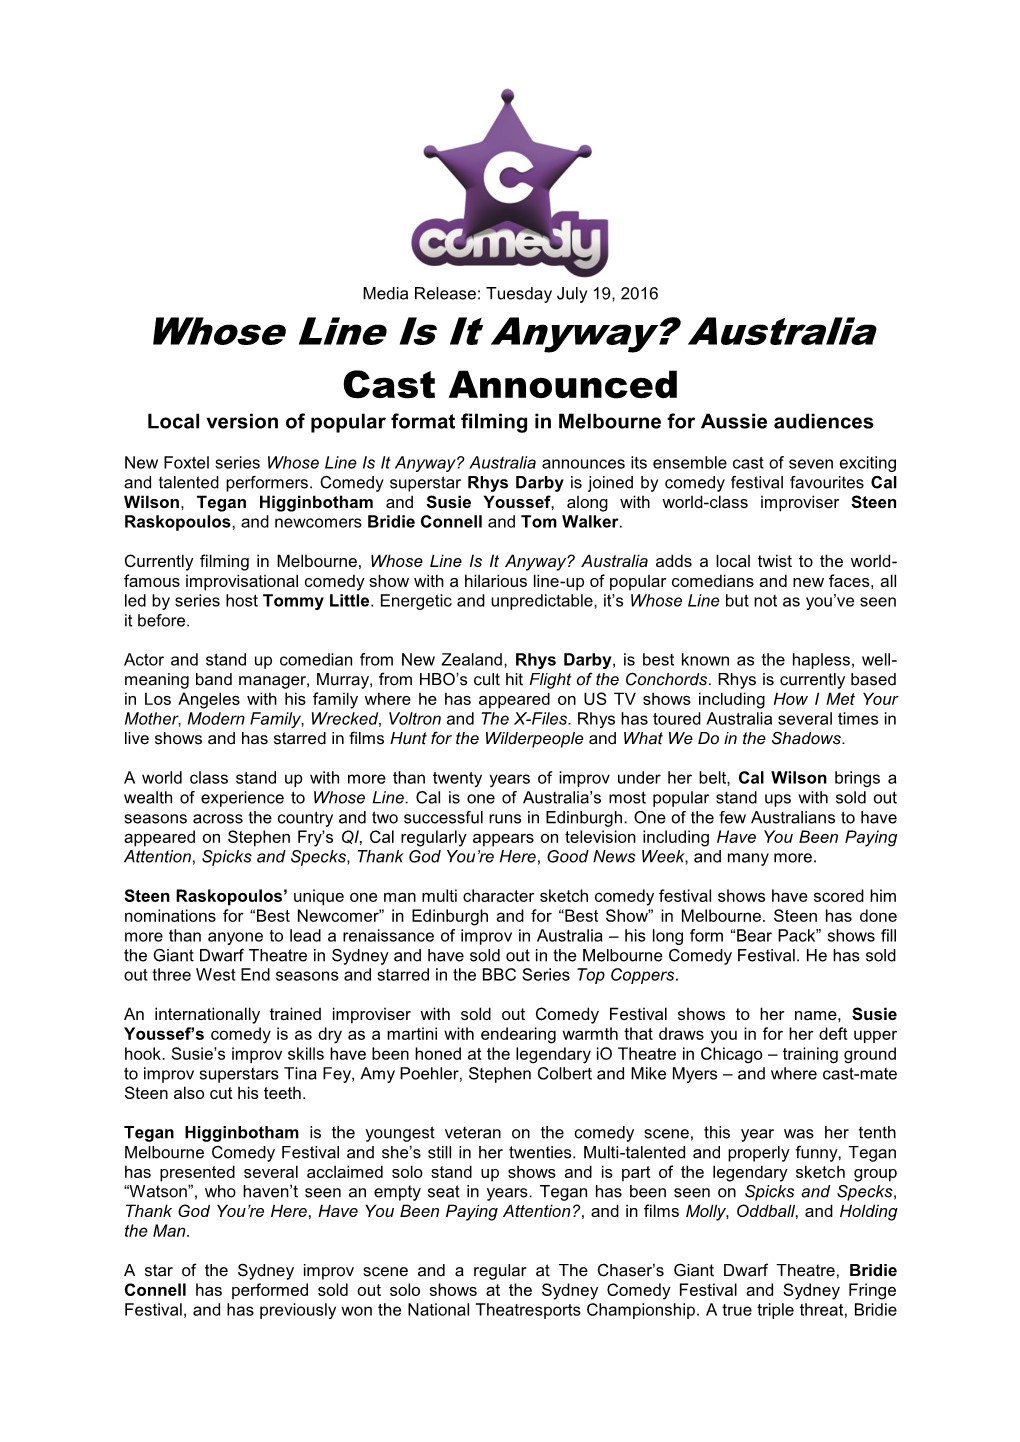 Whose Line Is It Anyway? Australia Cast Announced Local Version of Popular Format Filming in Melbourne for Aussie Audiences